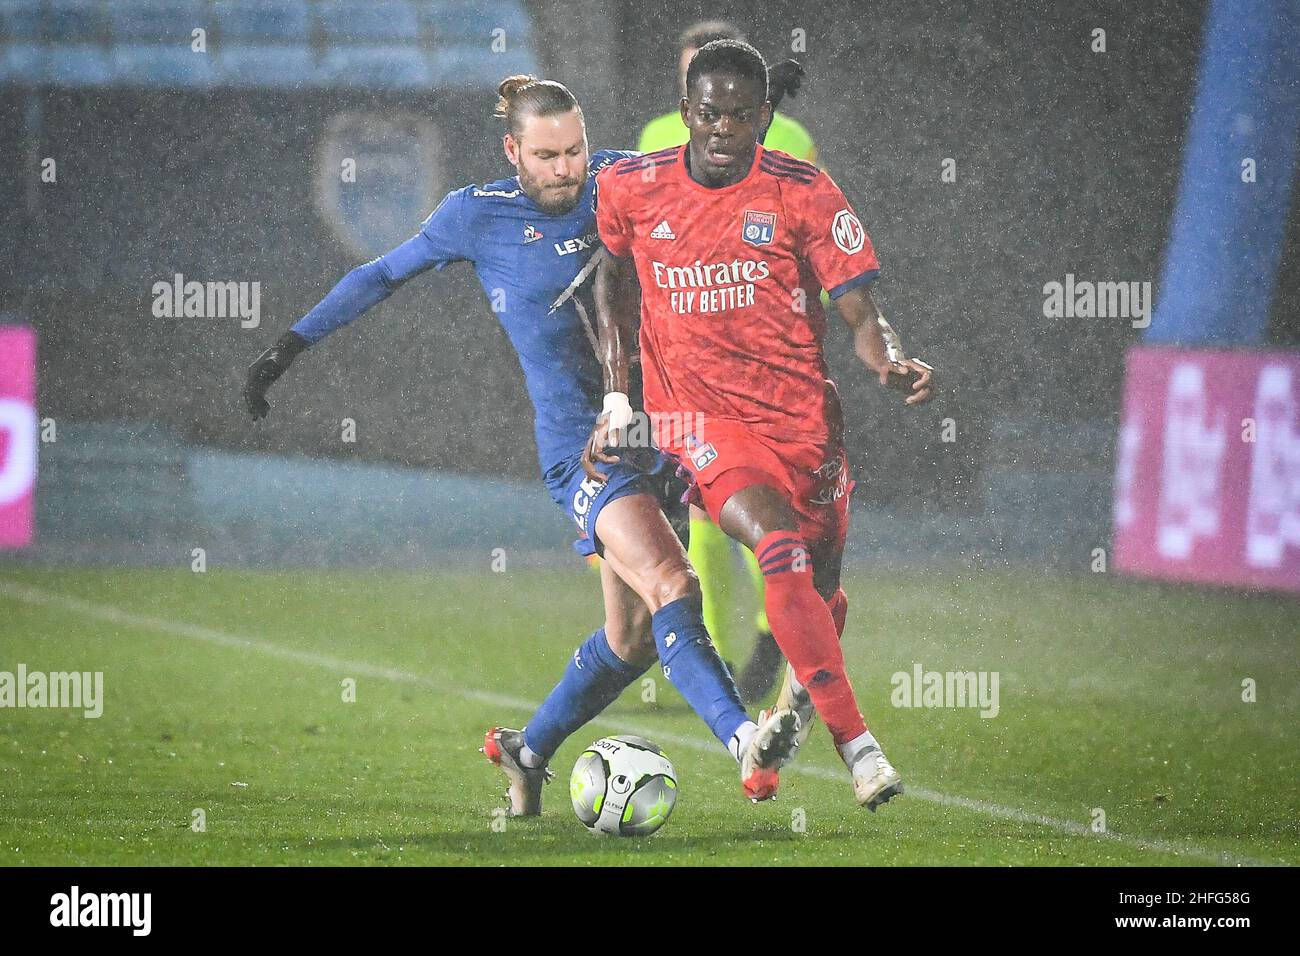 Troyes, France, France. 16th Jan, 2022. Renaud RIPART of ESTAC Troyes and  Castello LUKEBA of Lyon during the Ligue 1 match between ESTAC Troyes and  Olympique Lyonnais (OL) at Stade de l'Aube